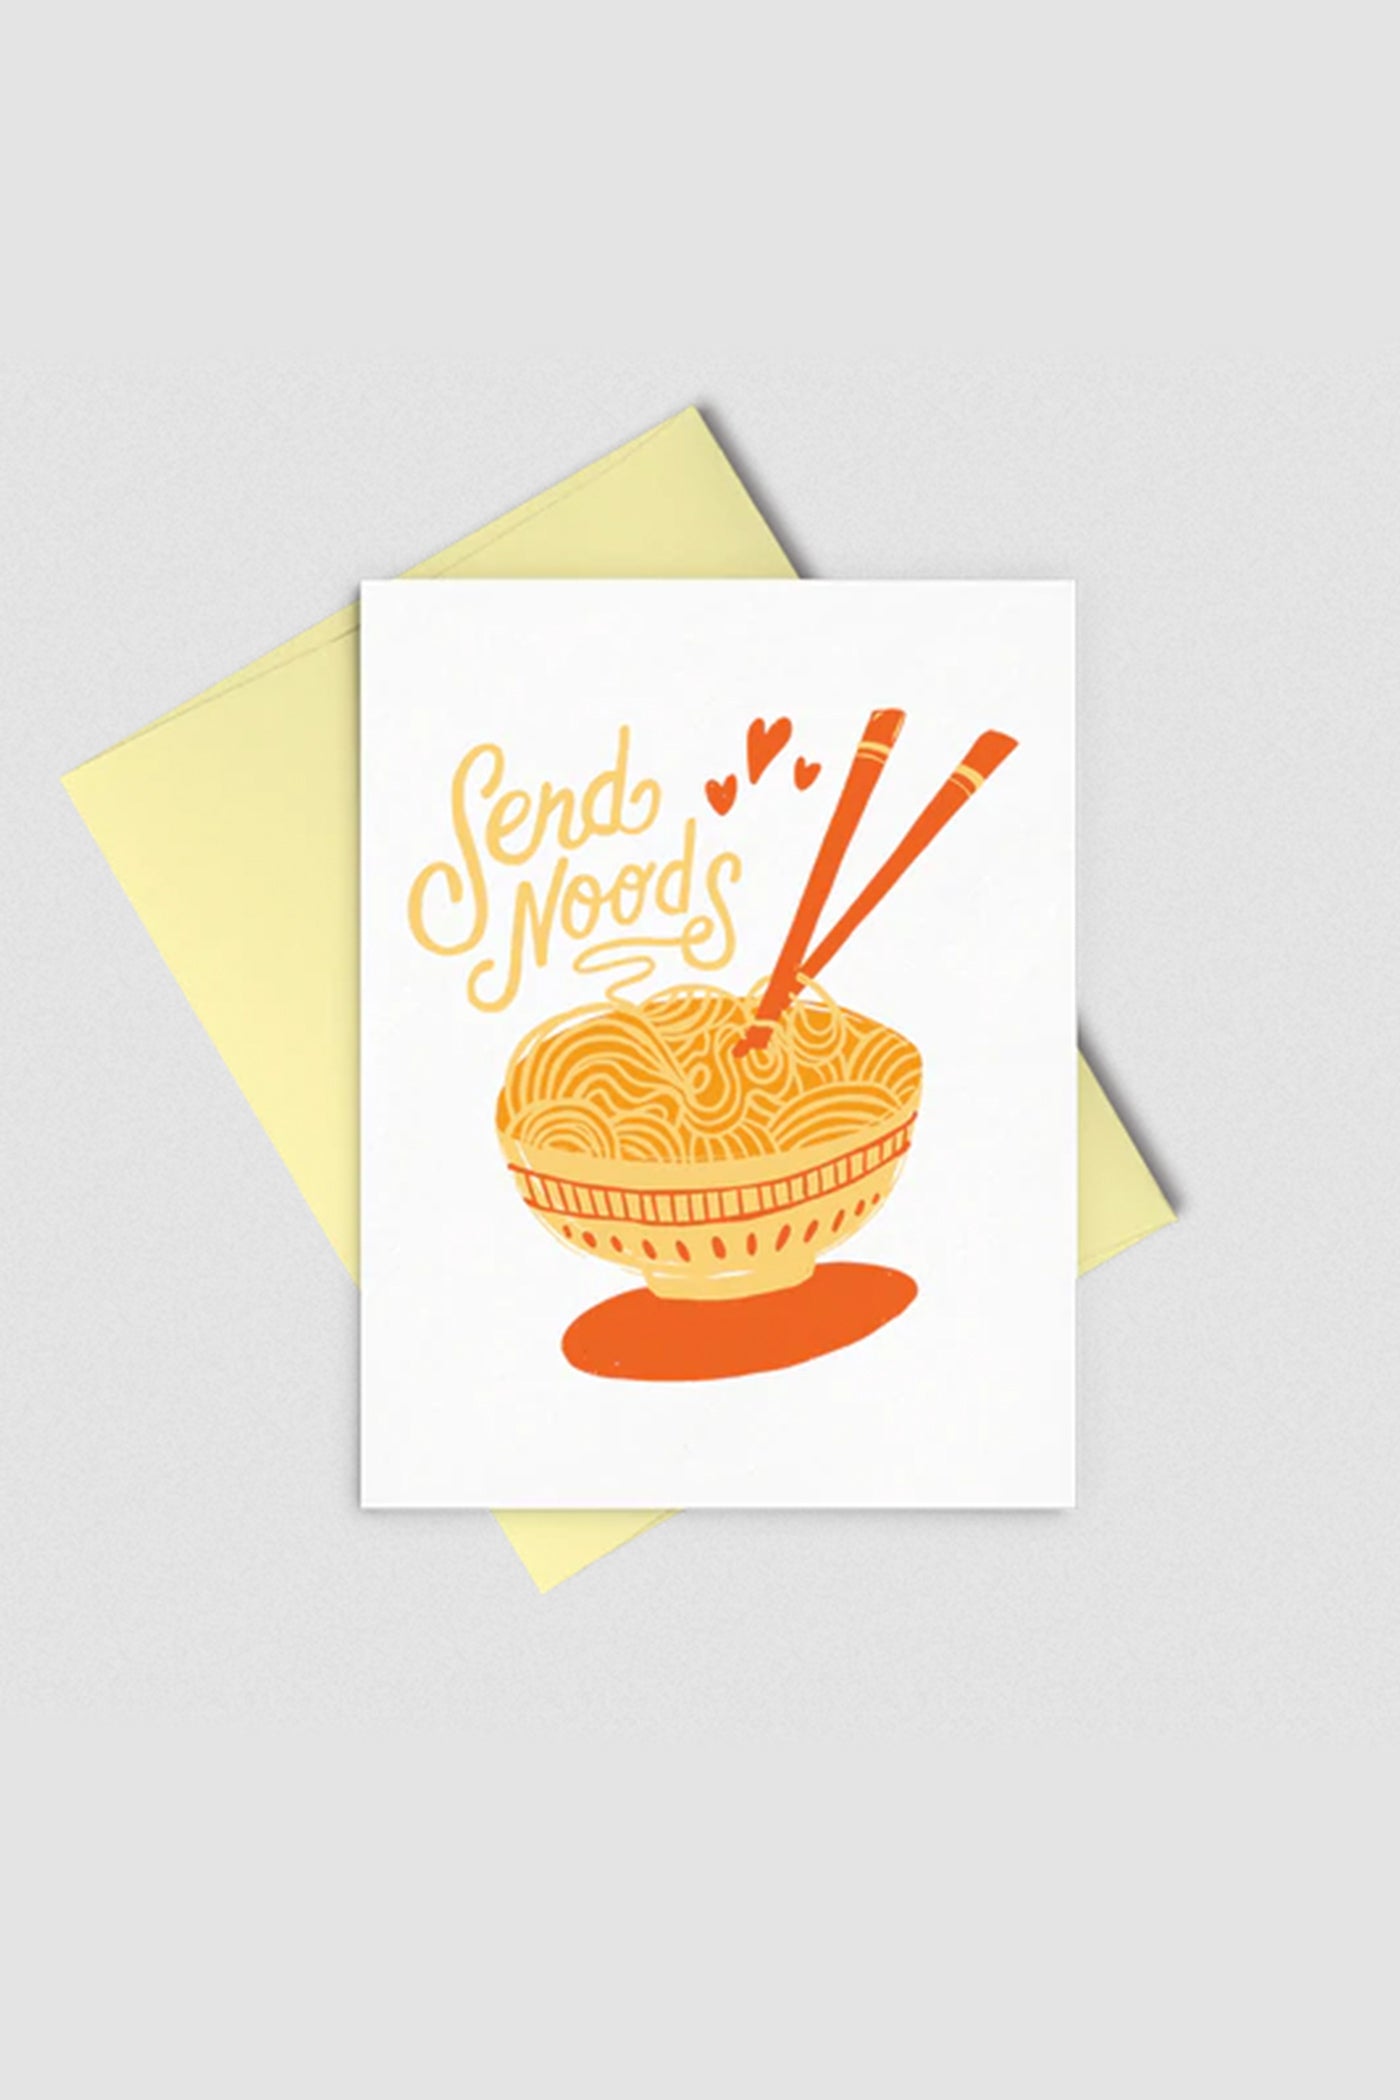 Send Noods Greeting Card by Talking Out of Turn